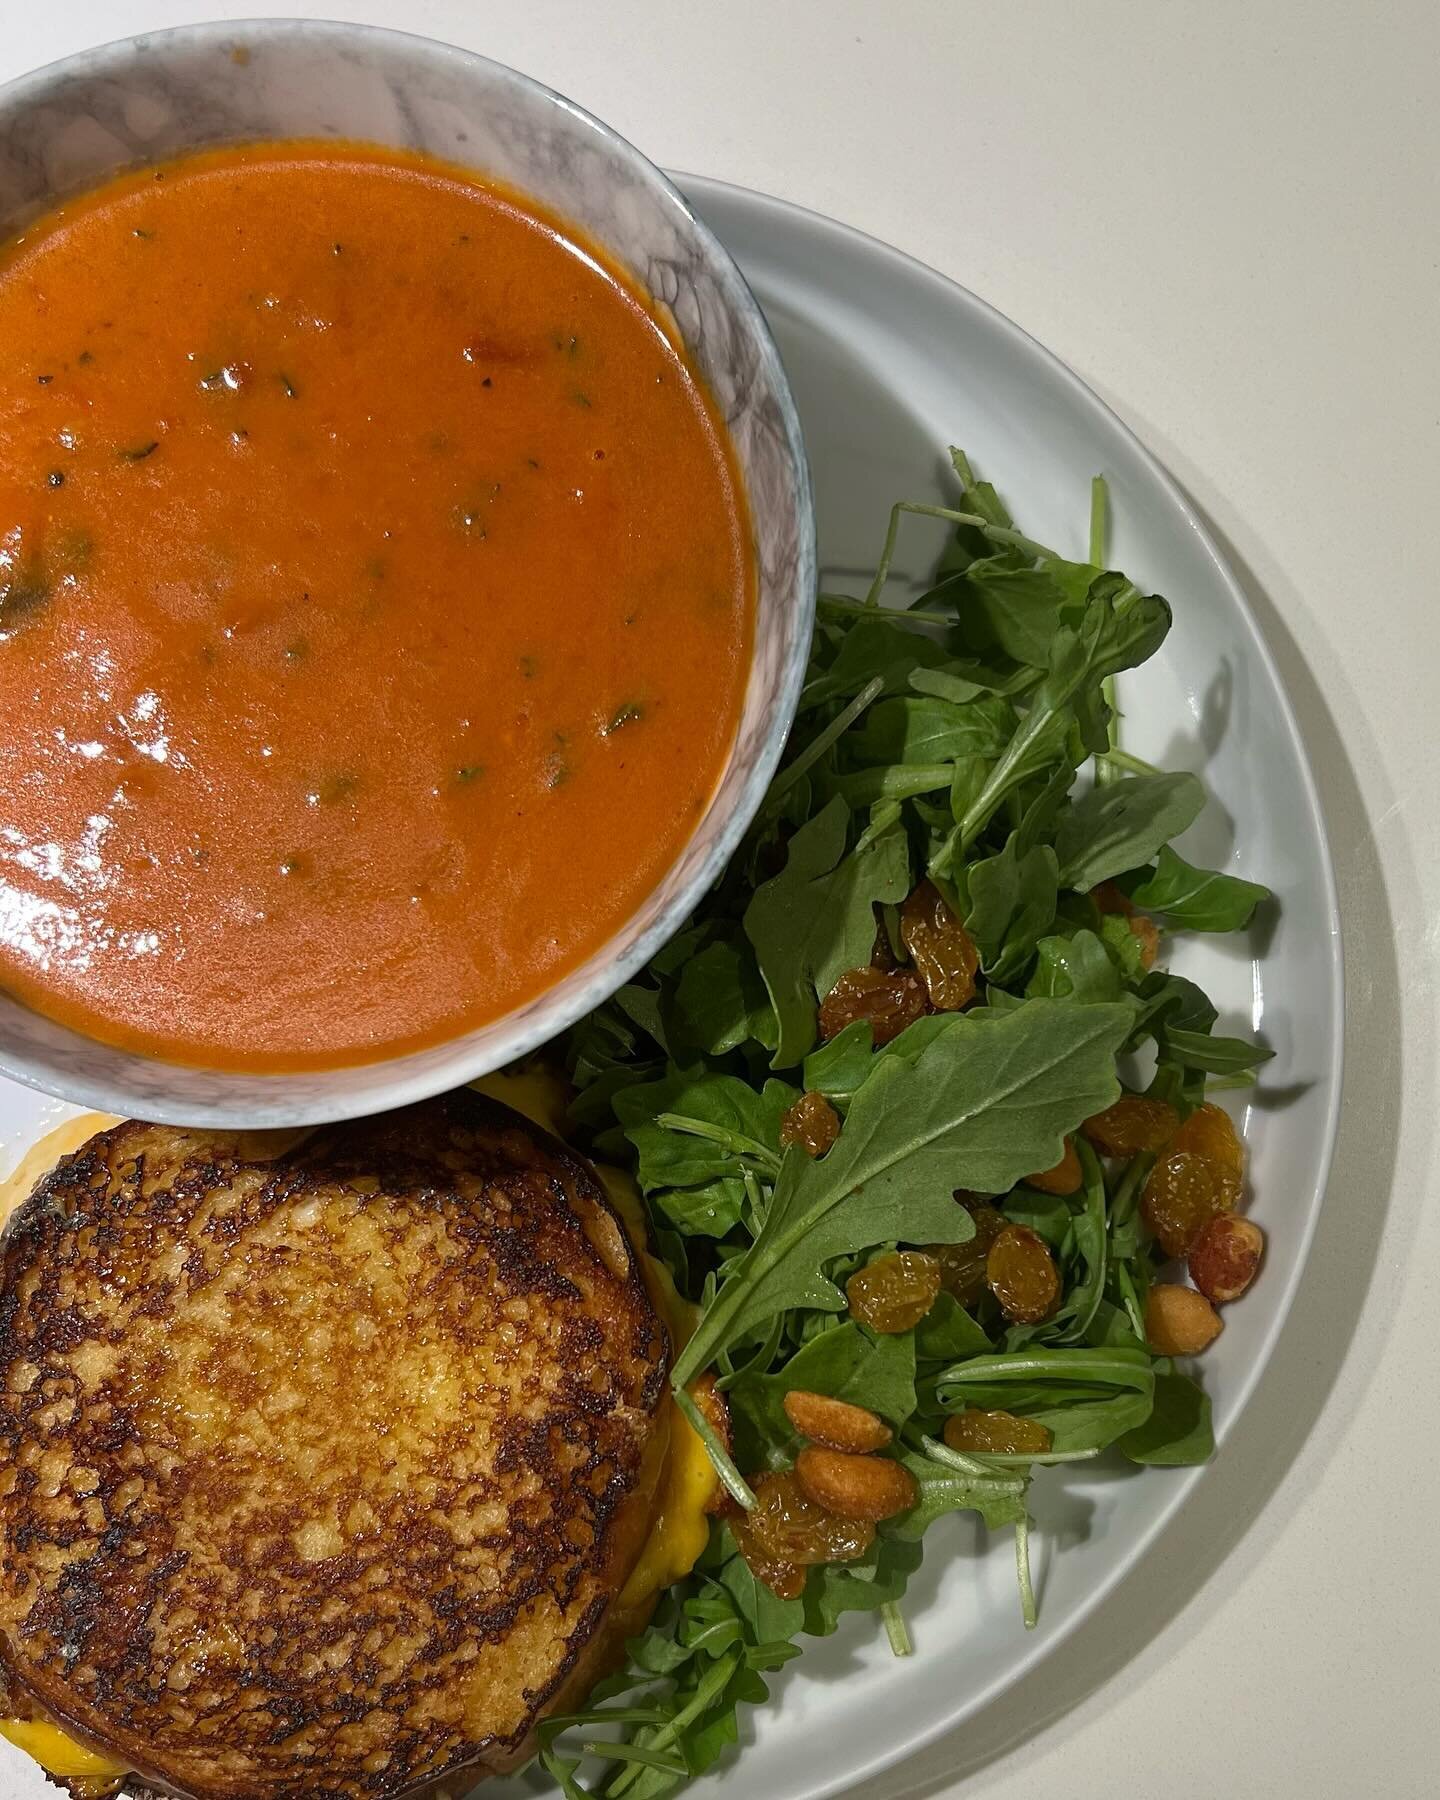 it&rsquo;s just tomato soup and grilled cheese. no long, drawn out caption. 

american and cheddar between a brioche bun flipped inside out. 

@traderjoes tomato soup poured over burst cherry tomatoes and thyme.

the salad is the only thing worth tal